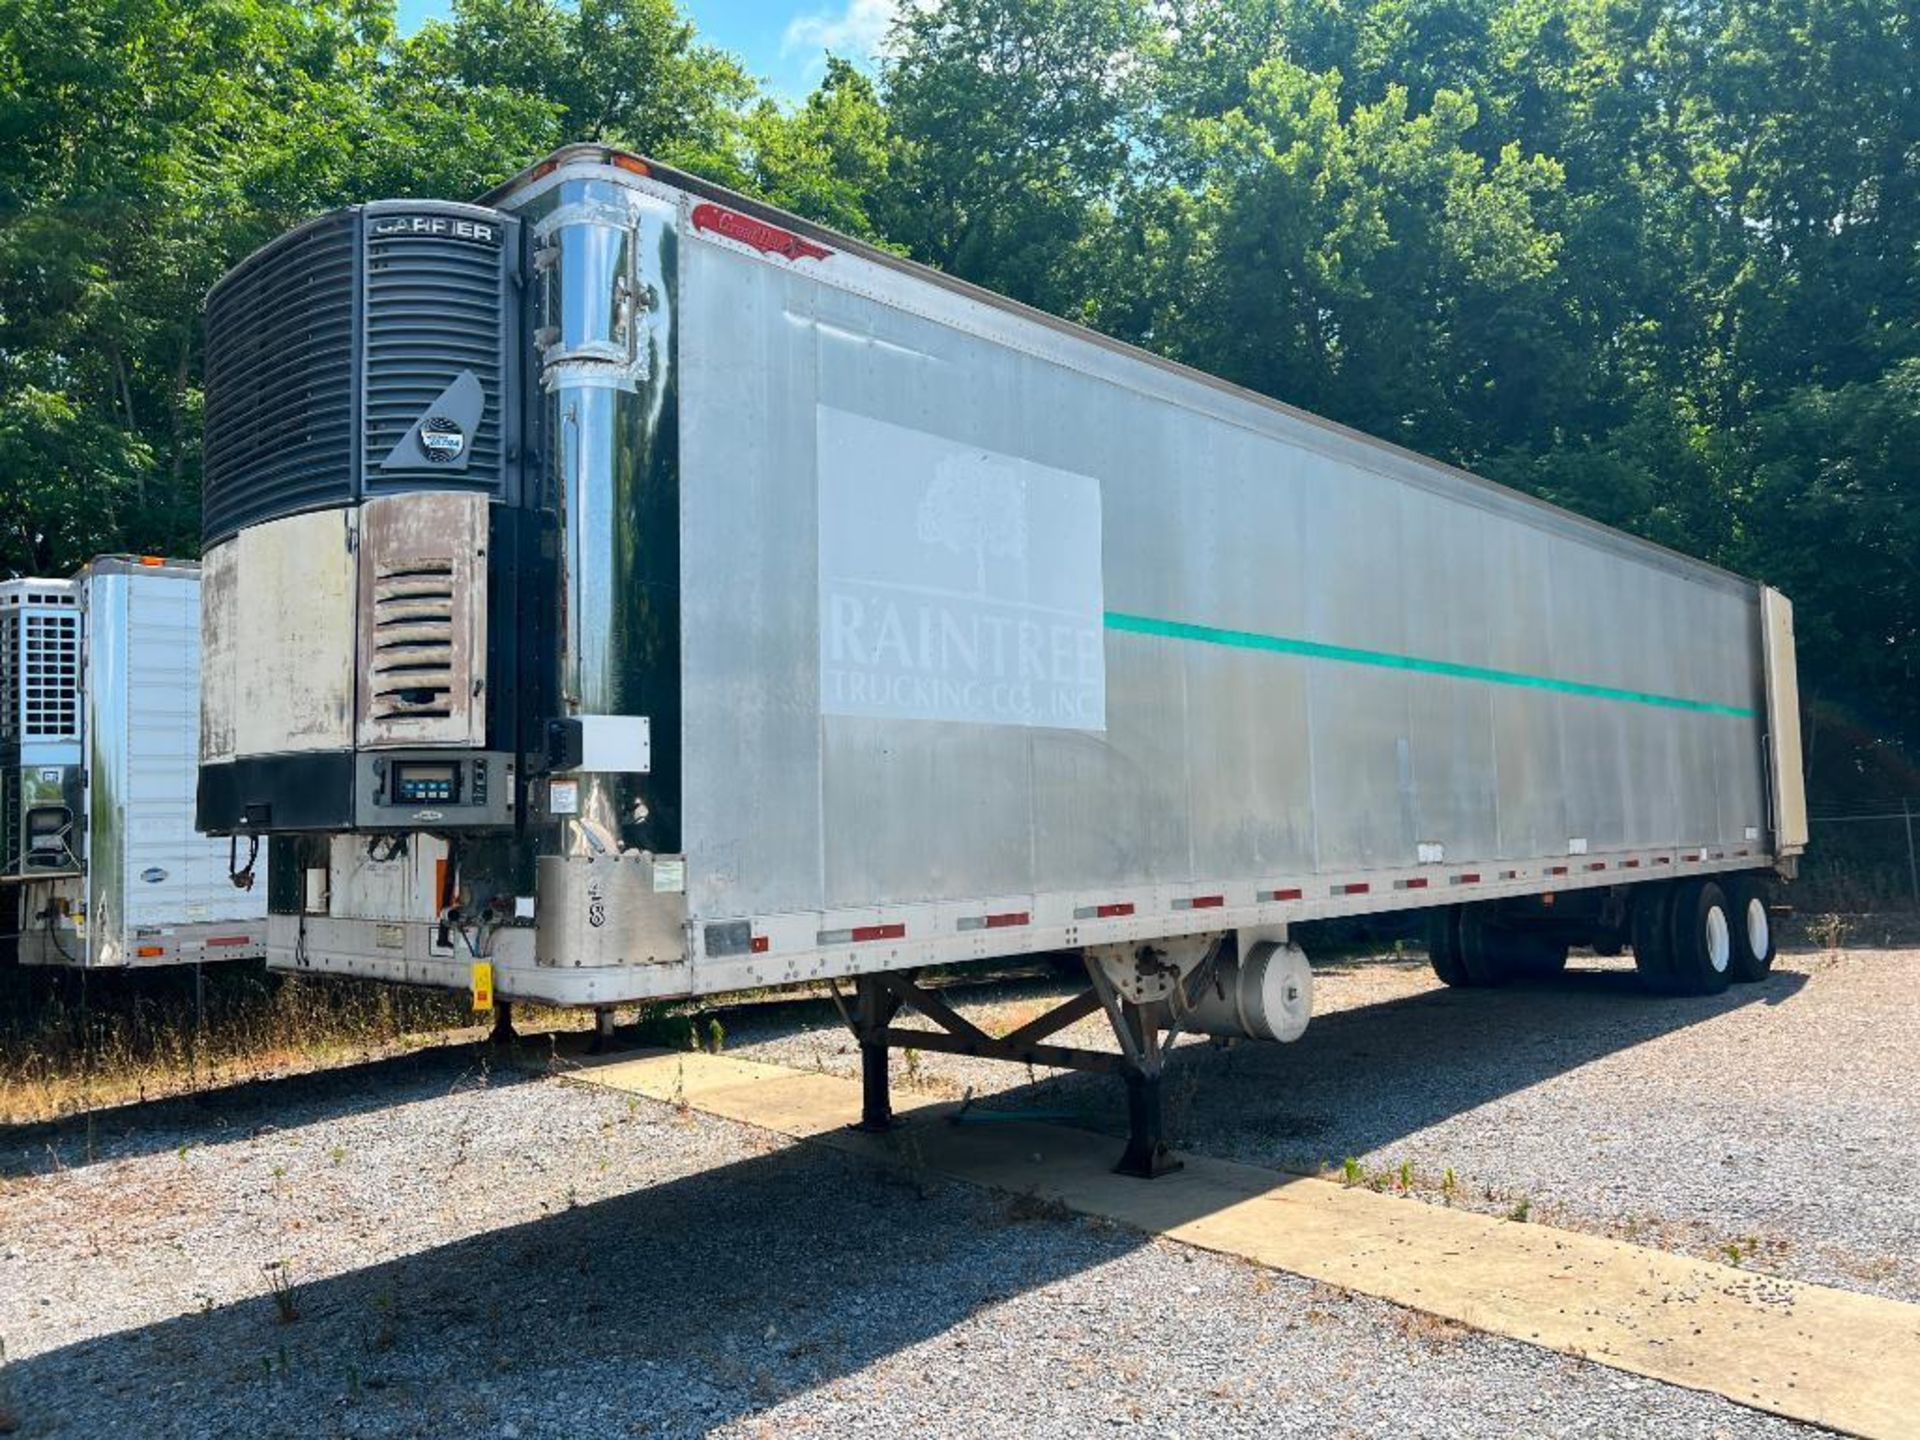 Carrier Transicold 48' x 8' Refrigerated Trailer - Image 2 of 2